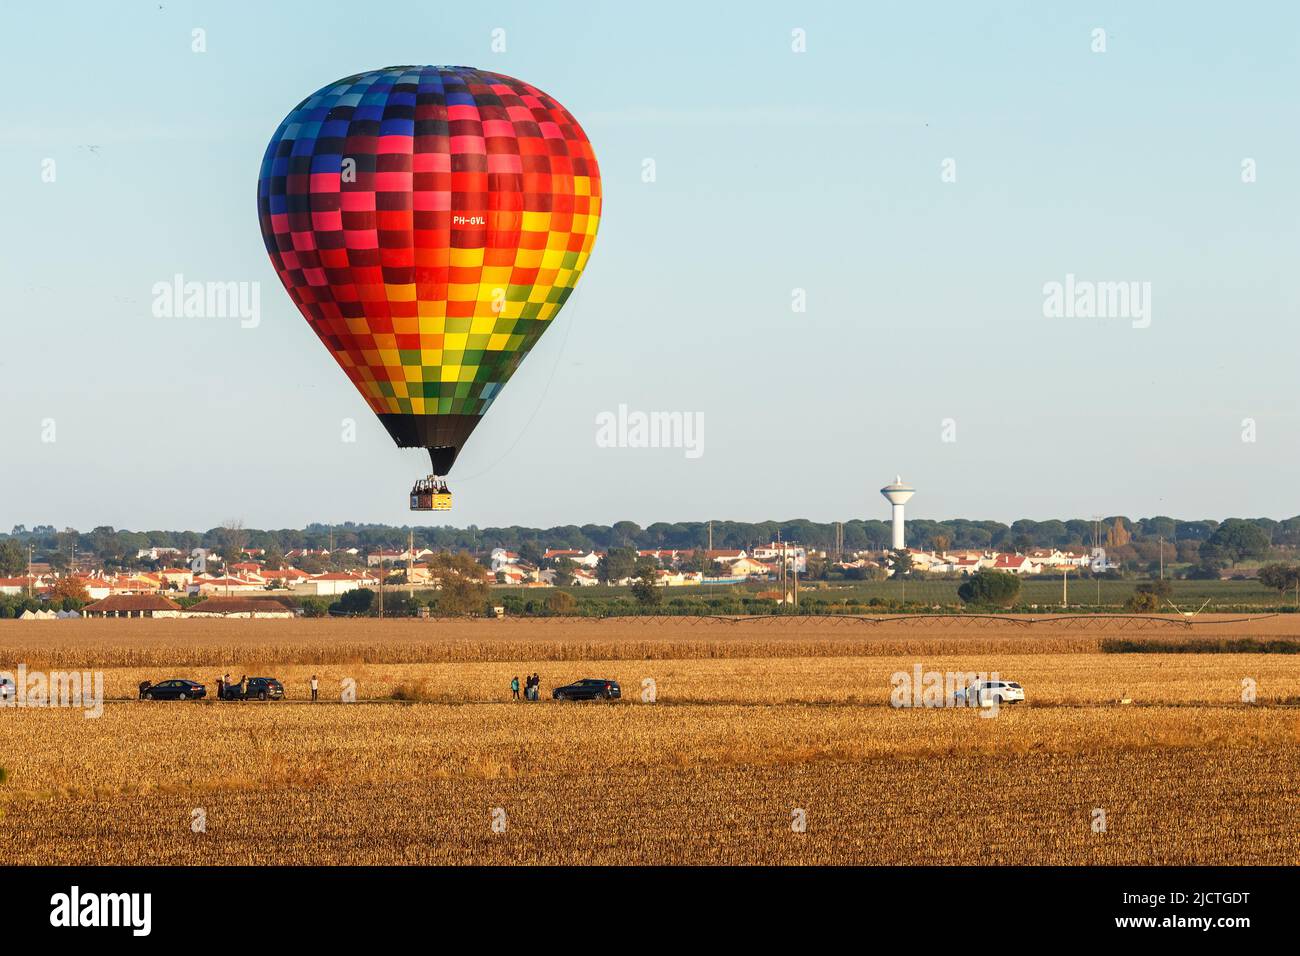 Coruche, Portugal - November 13, 2021: Large hot air balloon flying over cornfields with people watching on a road, near Coruche in Portugal, during t Stock Photo